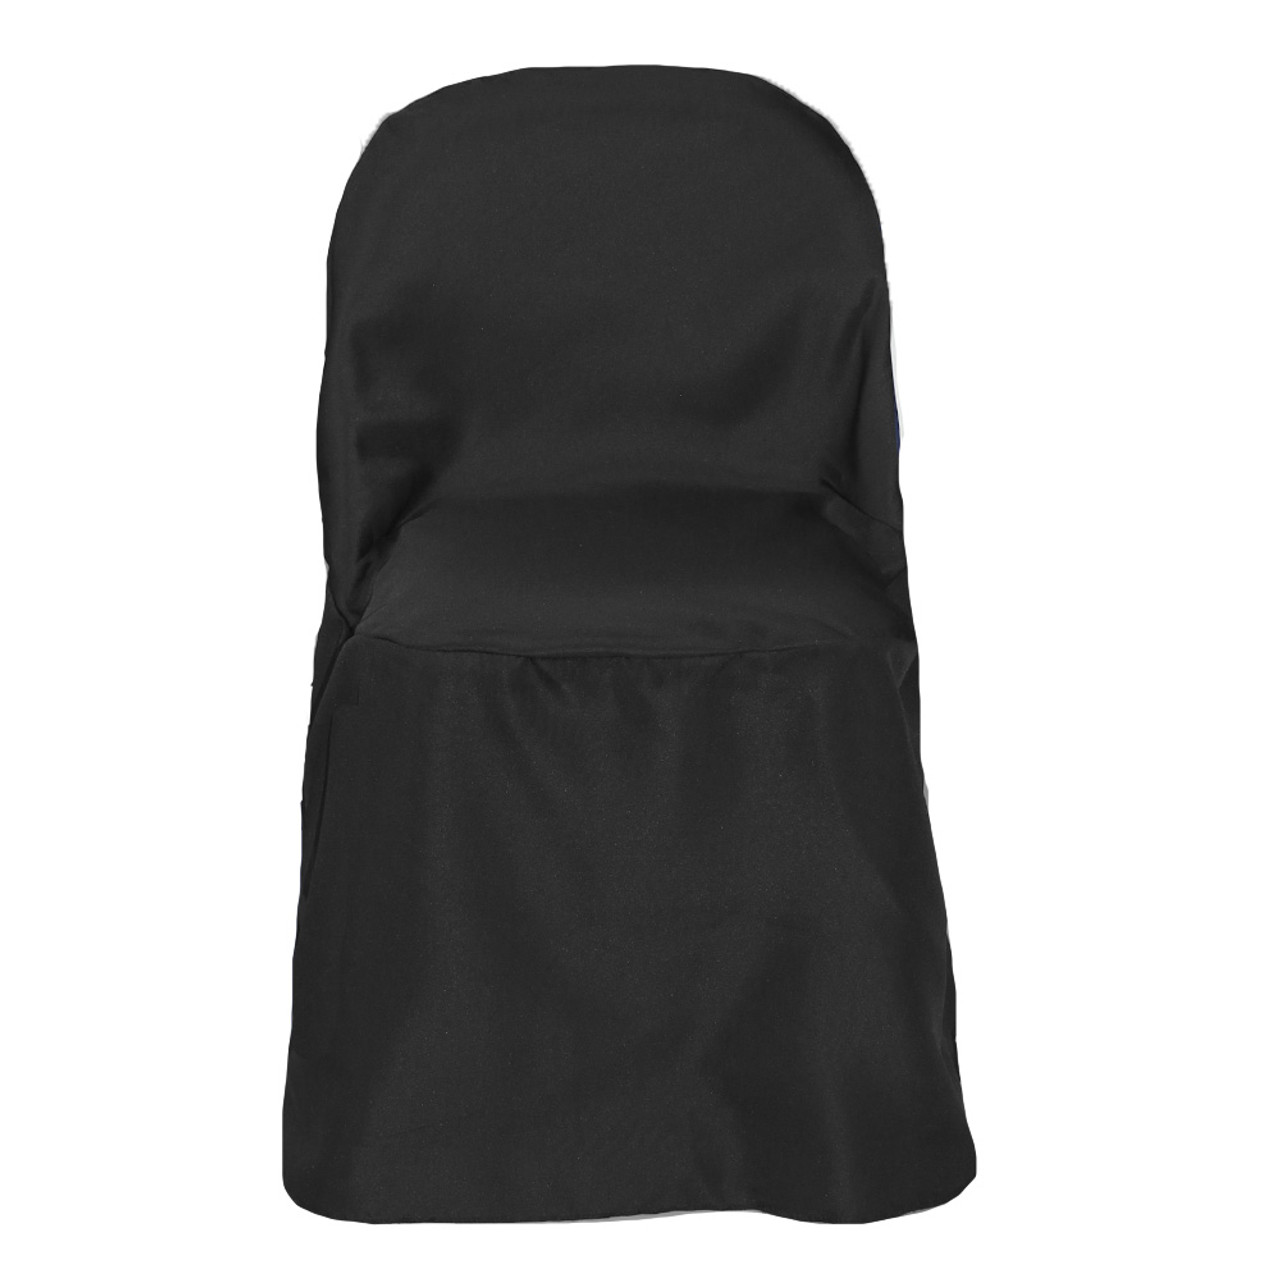 Polyester Folding Chair Cover Black 3  43796.1606756161 ?c=2